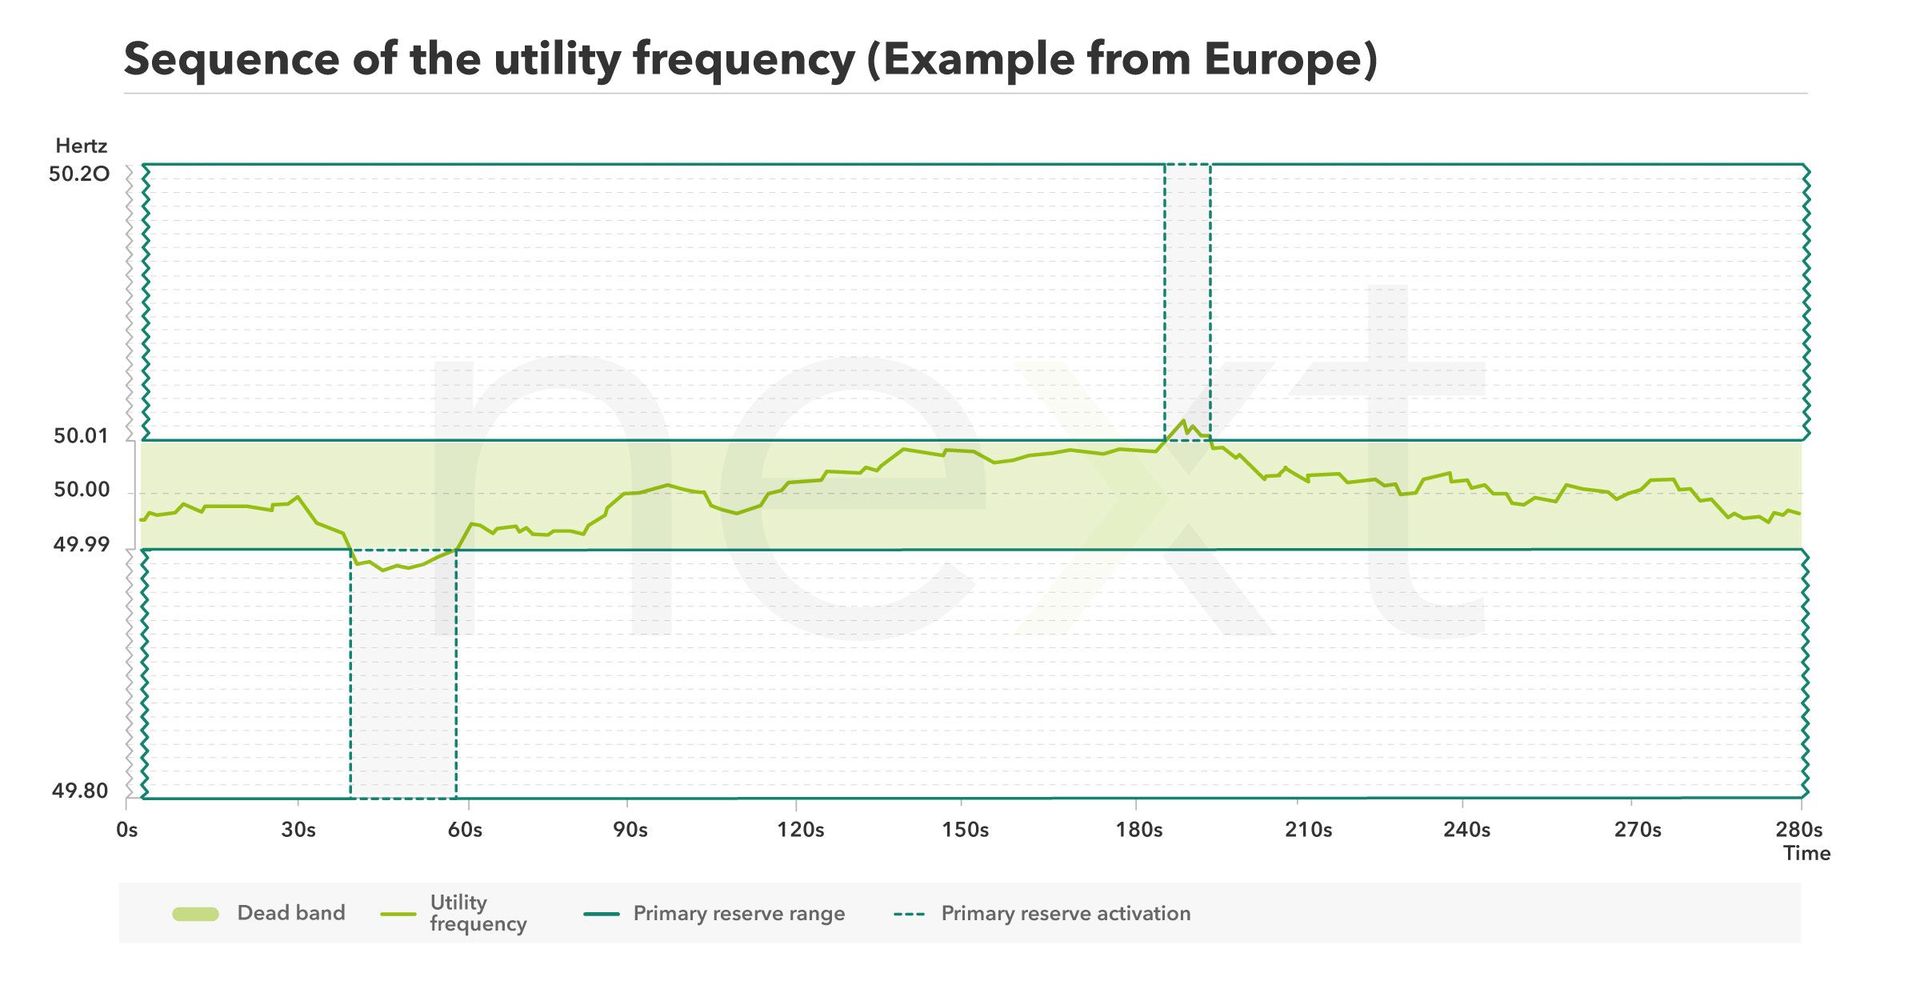 Functioning of the utility frequency in Europe explained.